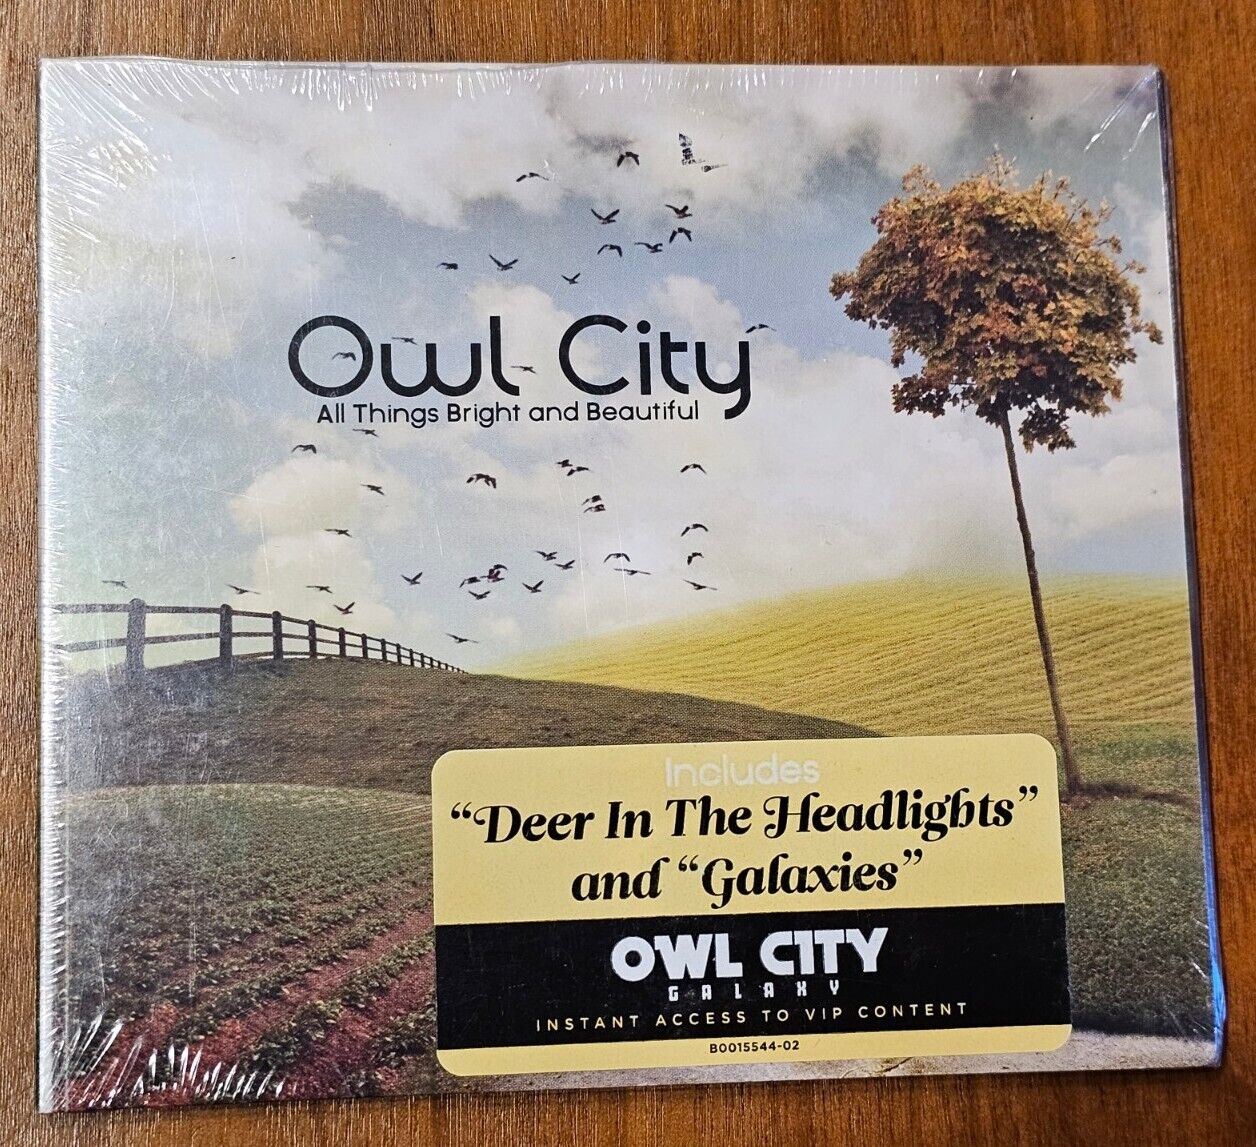 All Things Bright and Beautiful by Owl City (CD, 2011) New Sealed SHIPSFREE 